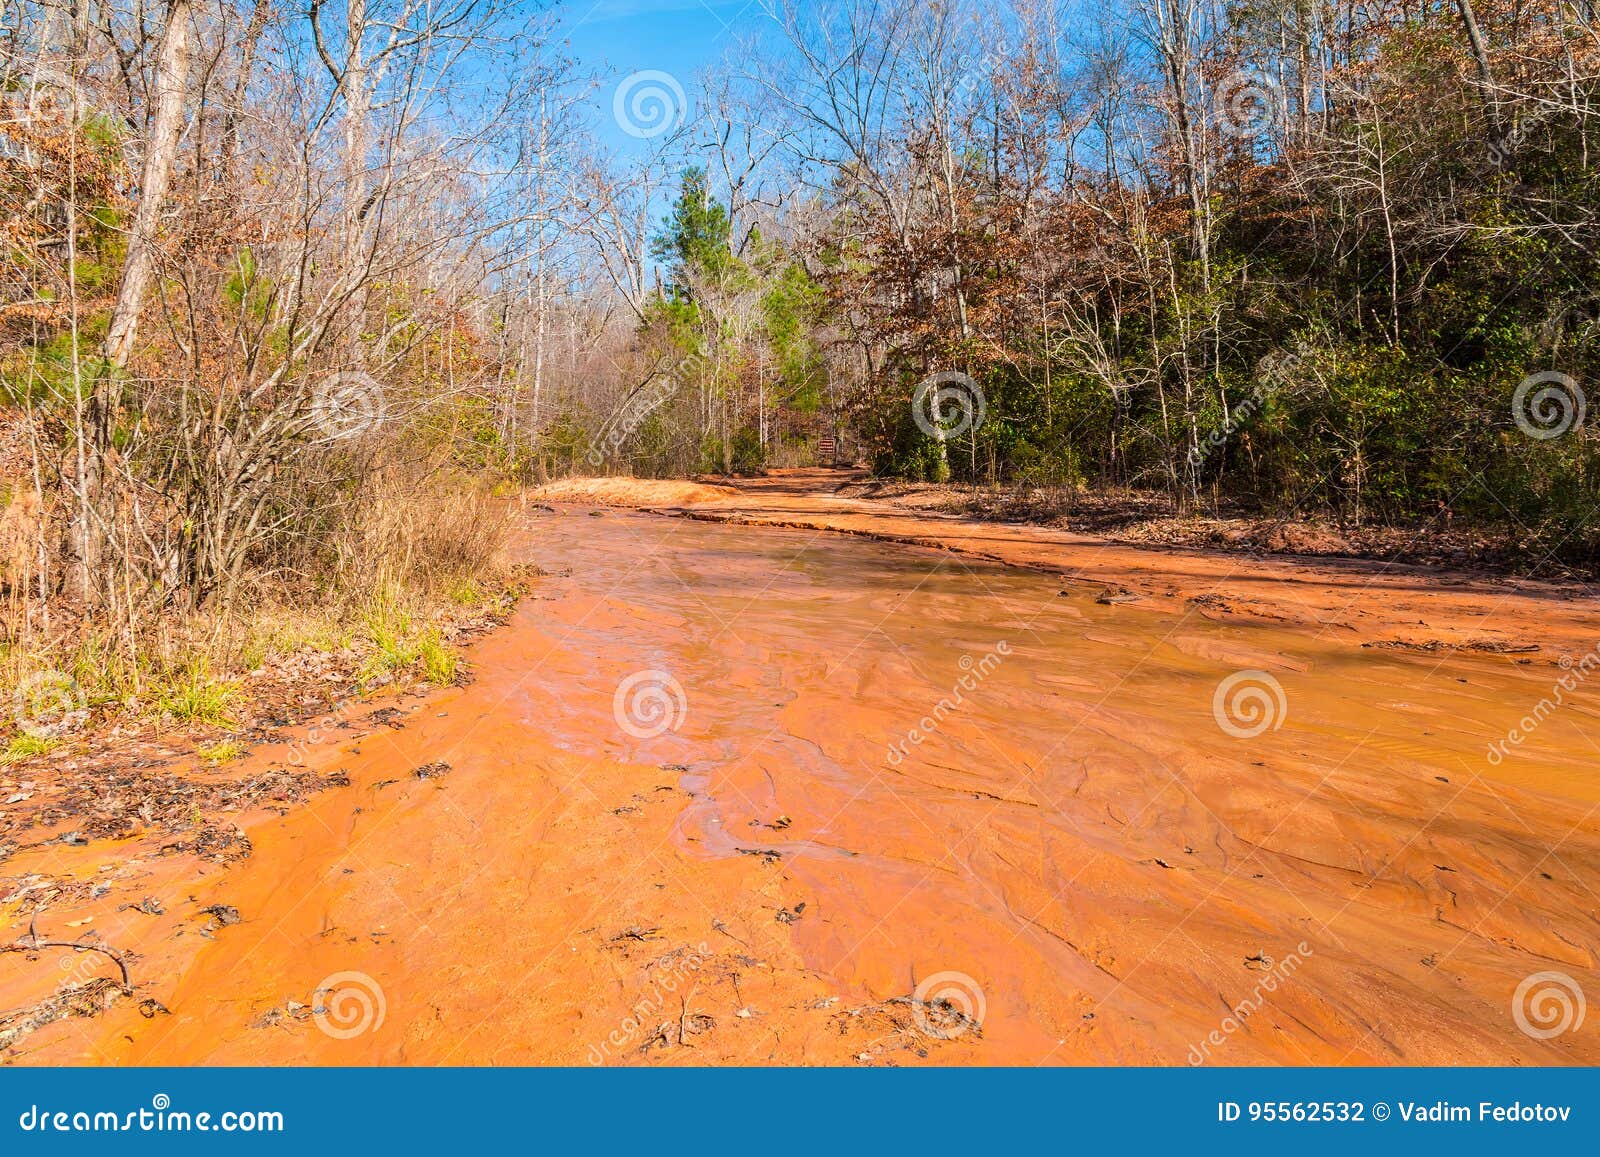 clay watercourse in providence canyon state park, georgia, usa